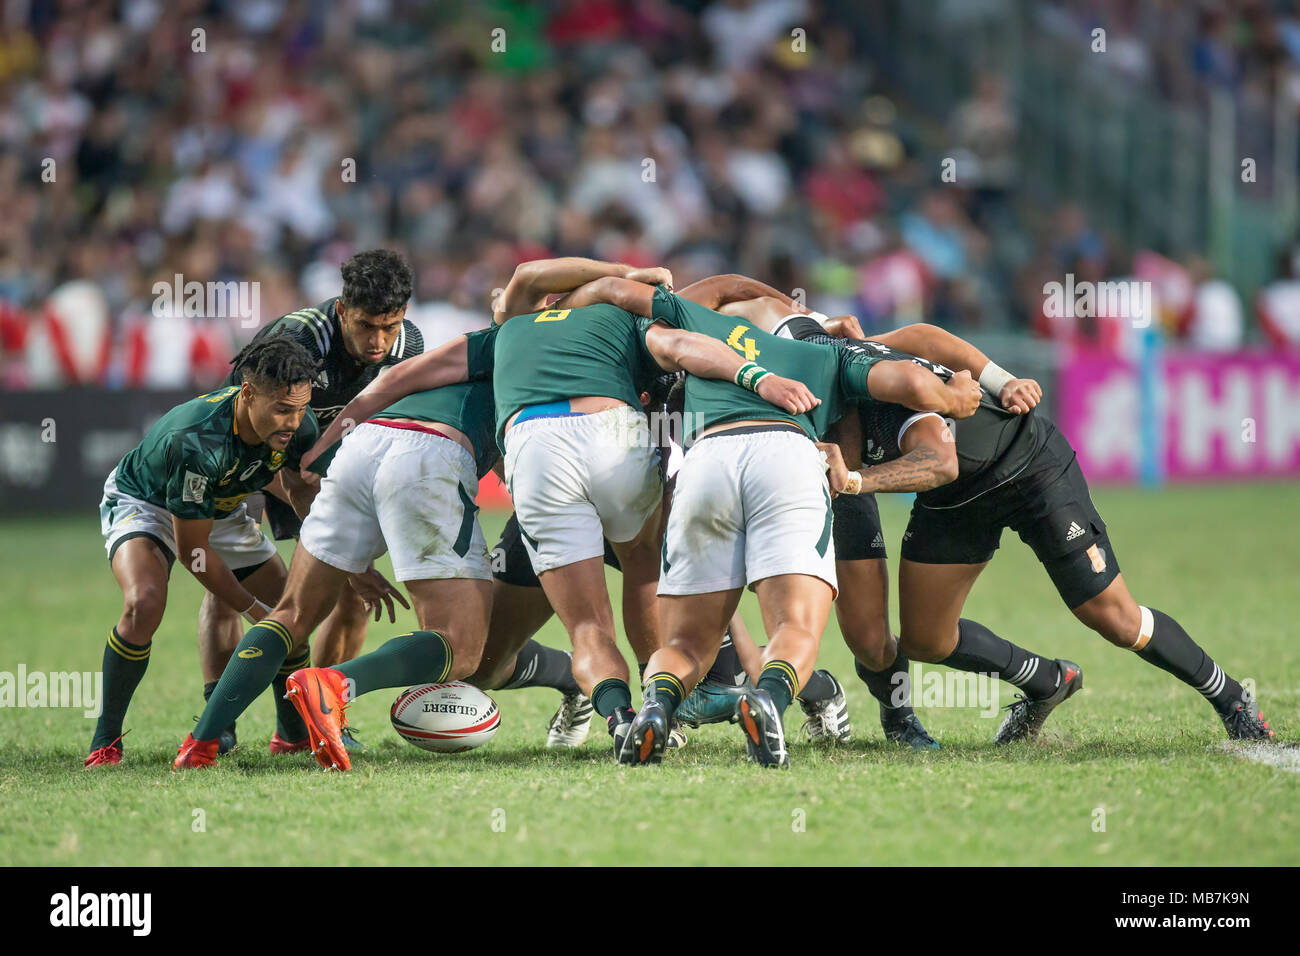 Watch Sports Clip HSBC World Rugby Sevens New Zealand